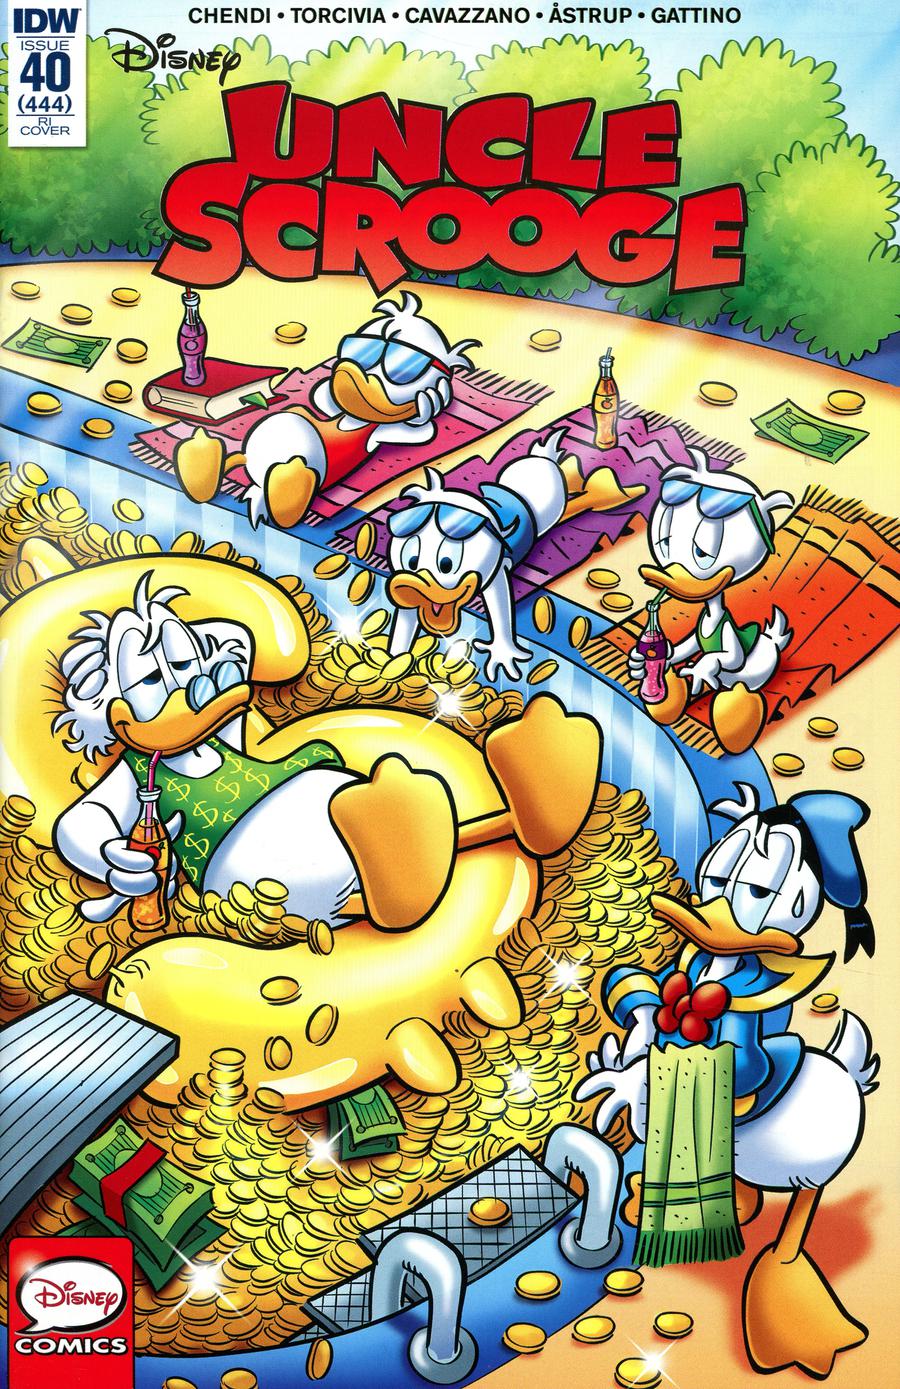 Uncle Scrooge Vol 2 #40 Cover C Incentive Marco Gervasio Variant Cover